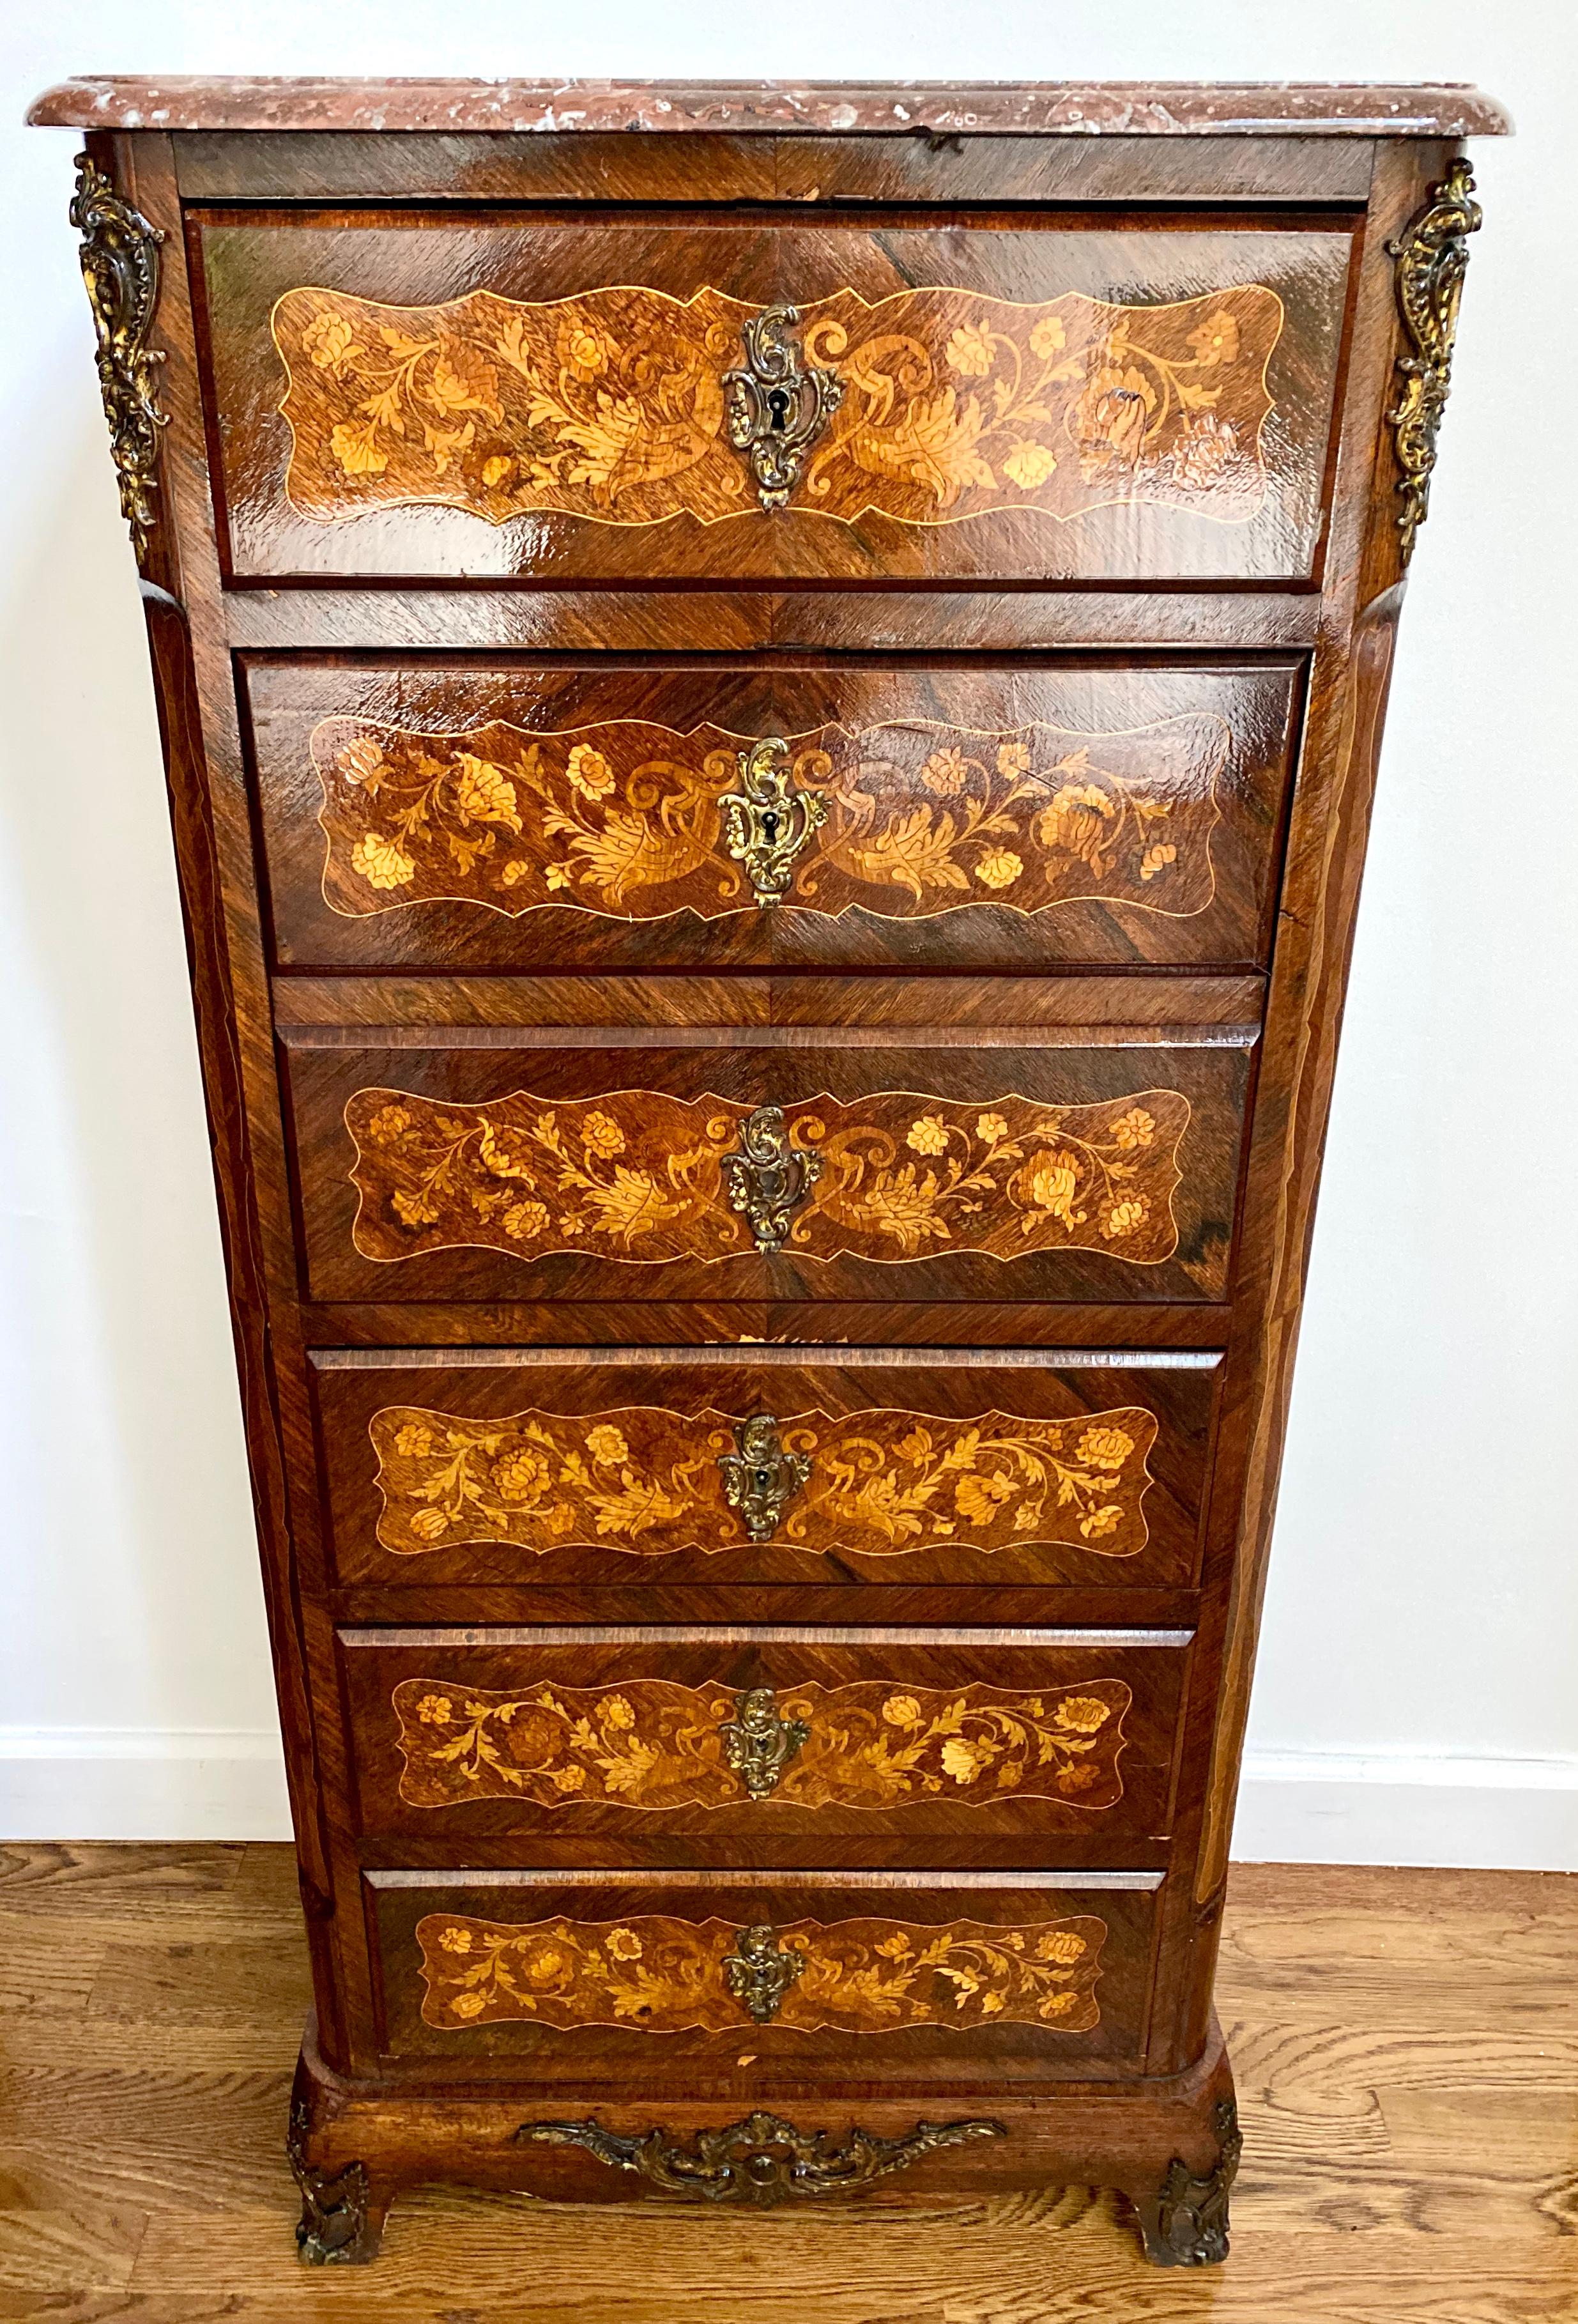 19th century Napoleon III French secretary (secretaire) chest of drawers in fine mahogany rosewood Inlaid marquetry. It has a grey marble top complete with its original in gilt bronze, circa 1870.
  